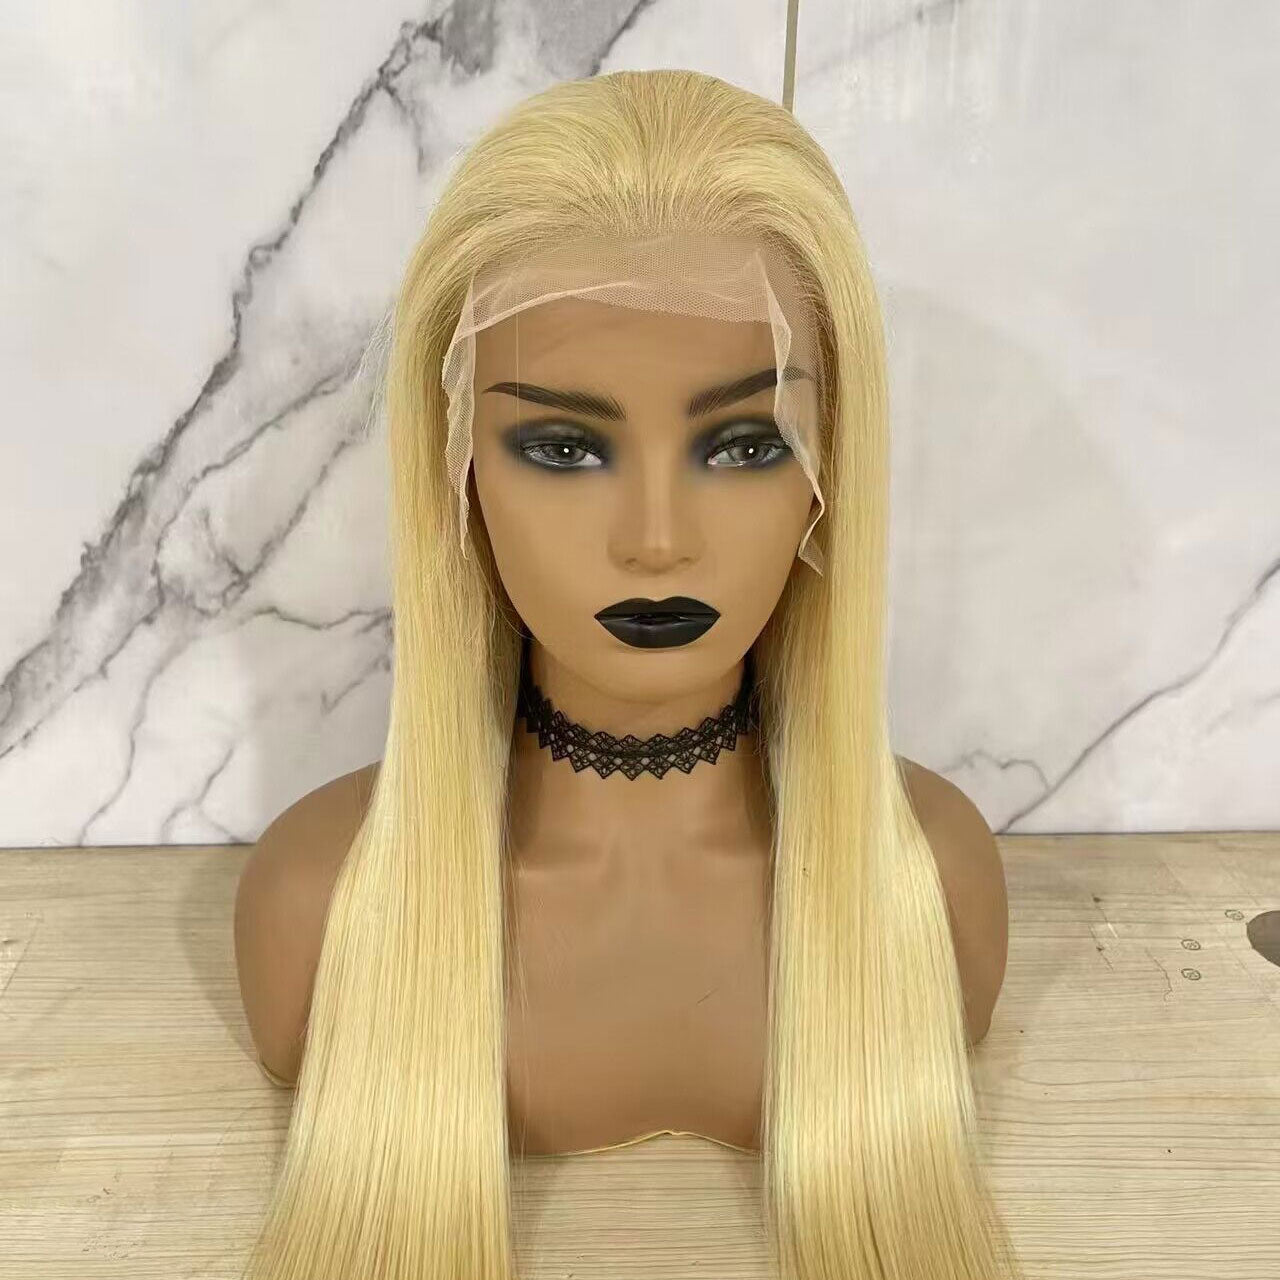 Modern Show Deluxe 150% Long 613 360 Transparent Lace Wig Pre Plucked With Baby Hair 10 - 36 inch